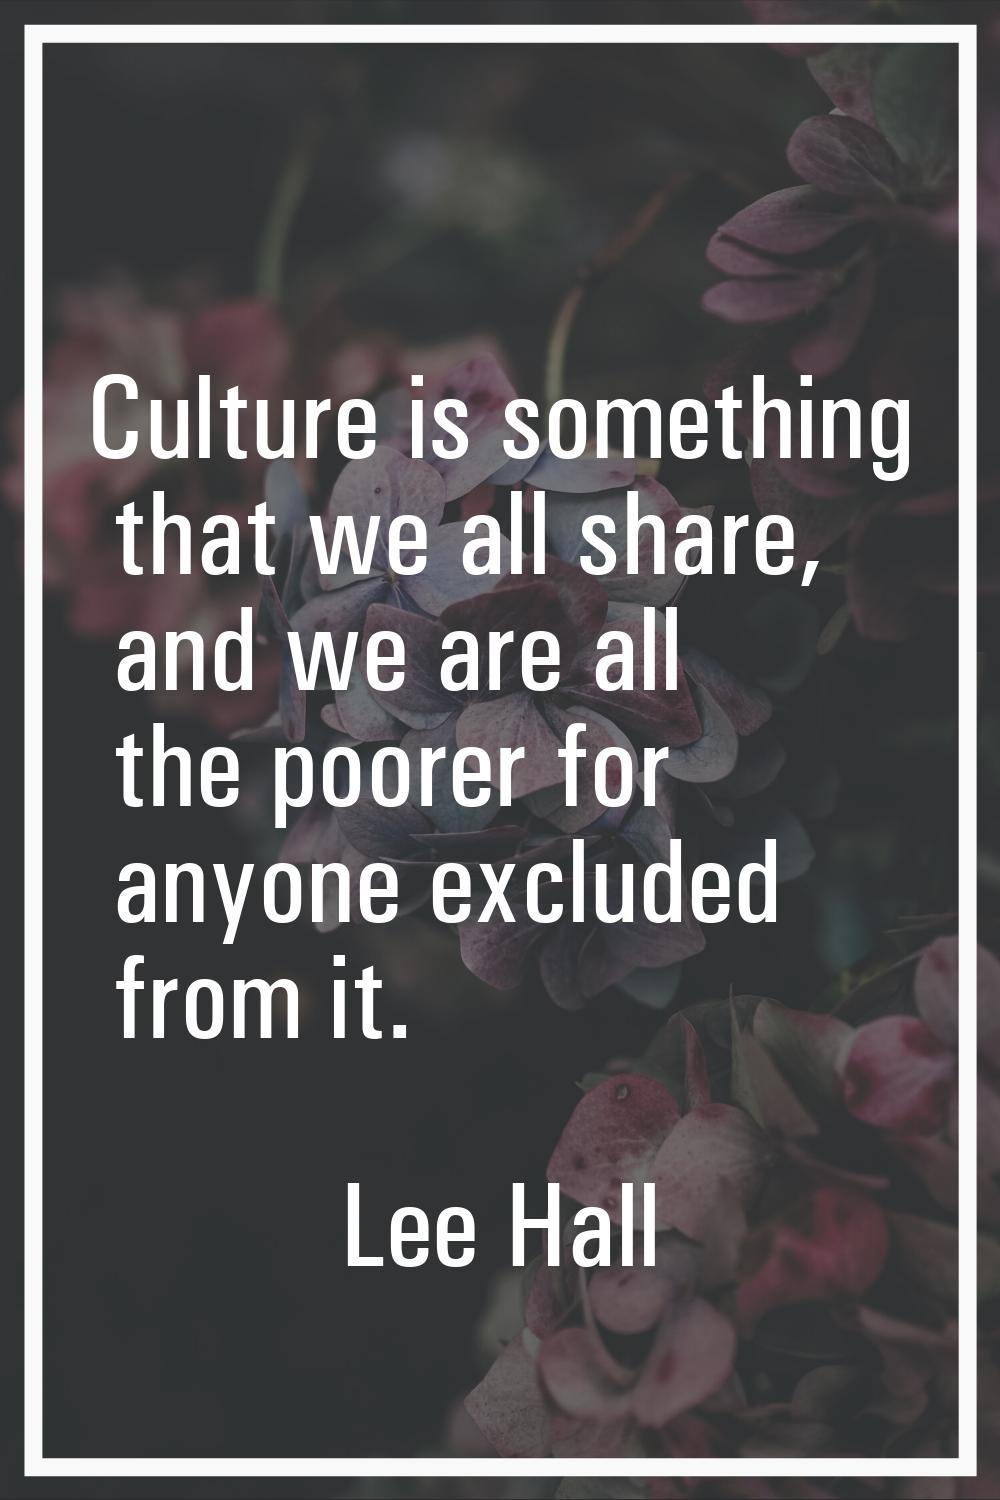 Culture is something that we all share, and we are all the poorer for anyone excluded from it.